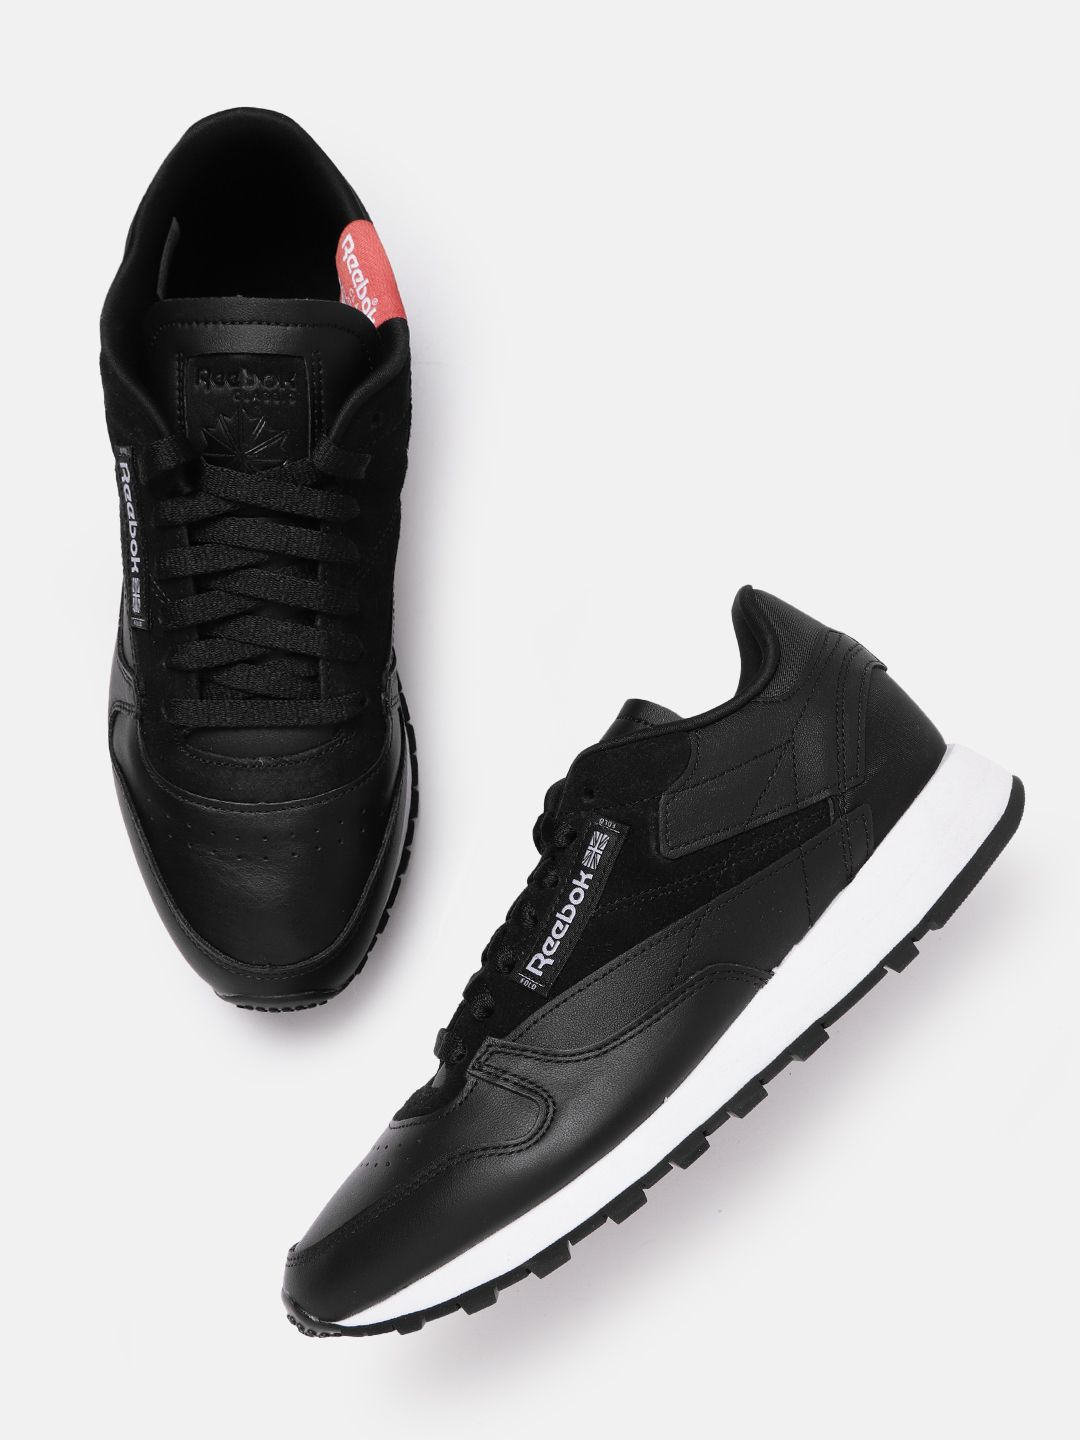 Reebok Classic Unisex Black Solid Leather Sneakers Price in India